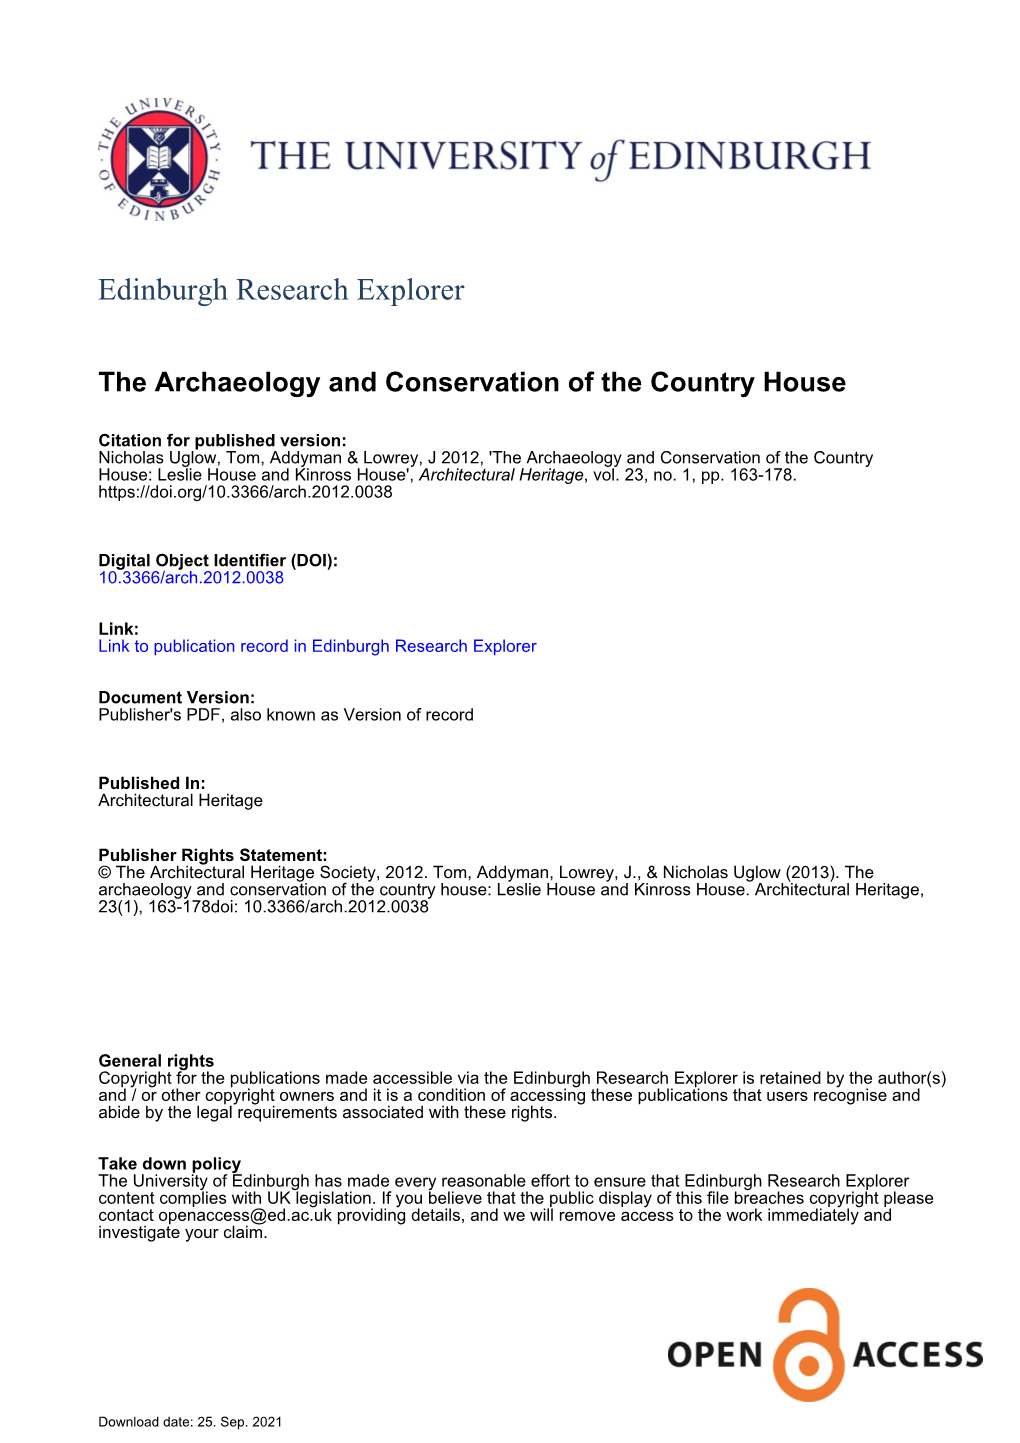 The Archaeology and Conservation of the Country House